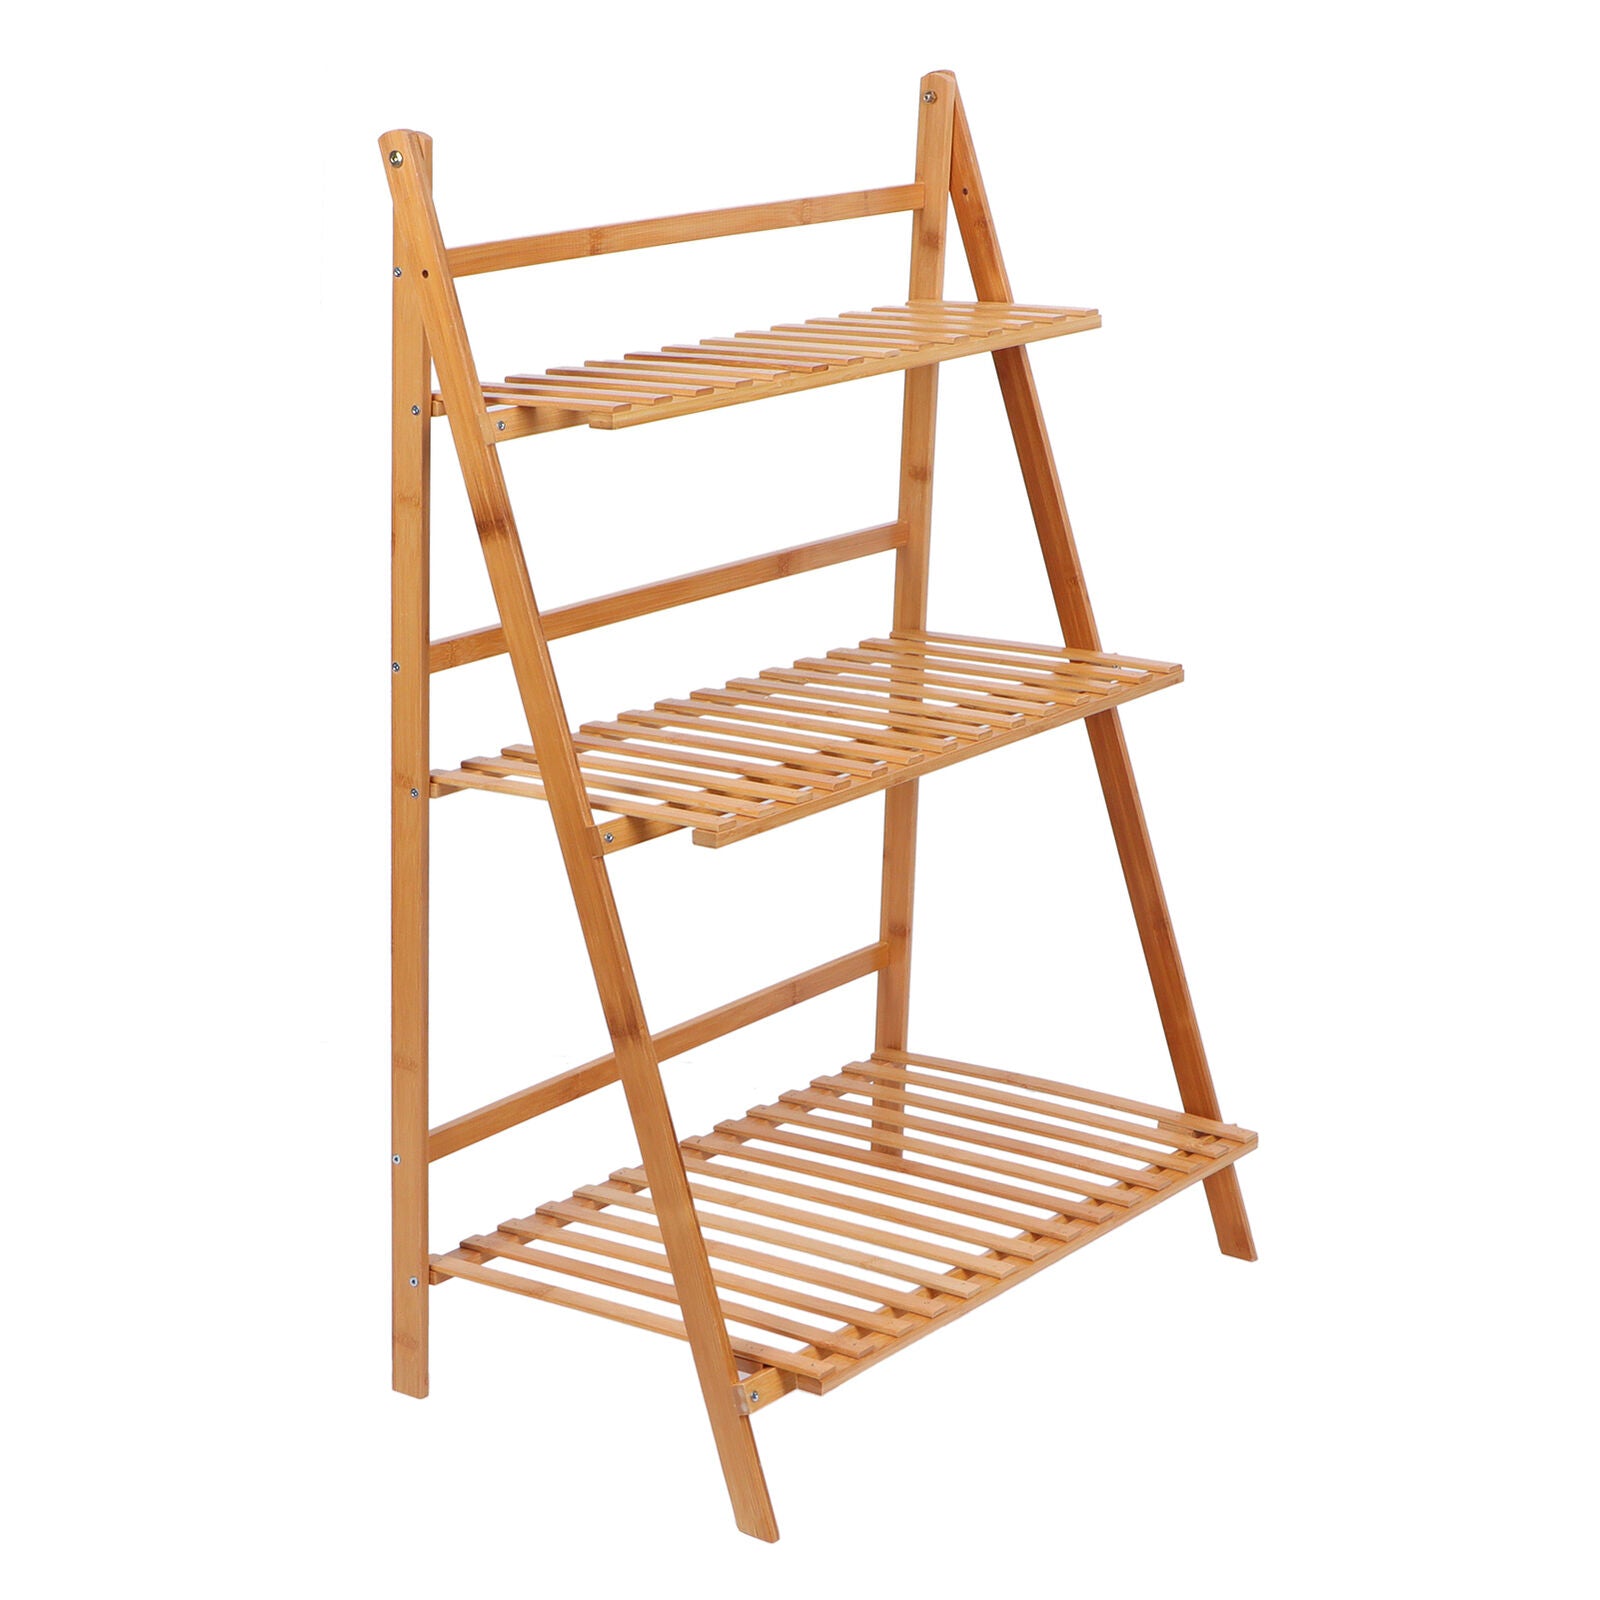 3 Tiers Bamboo Ladder Plant Stand 3-Tier Foldable Flower Pot Display Shelf Rack